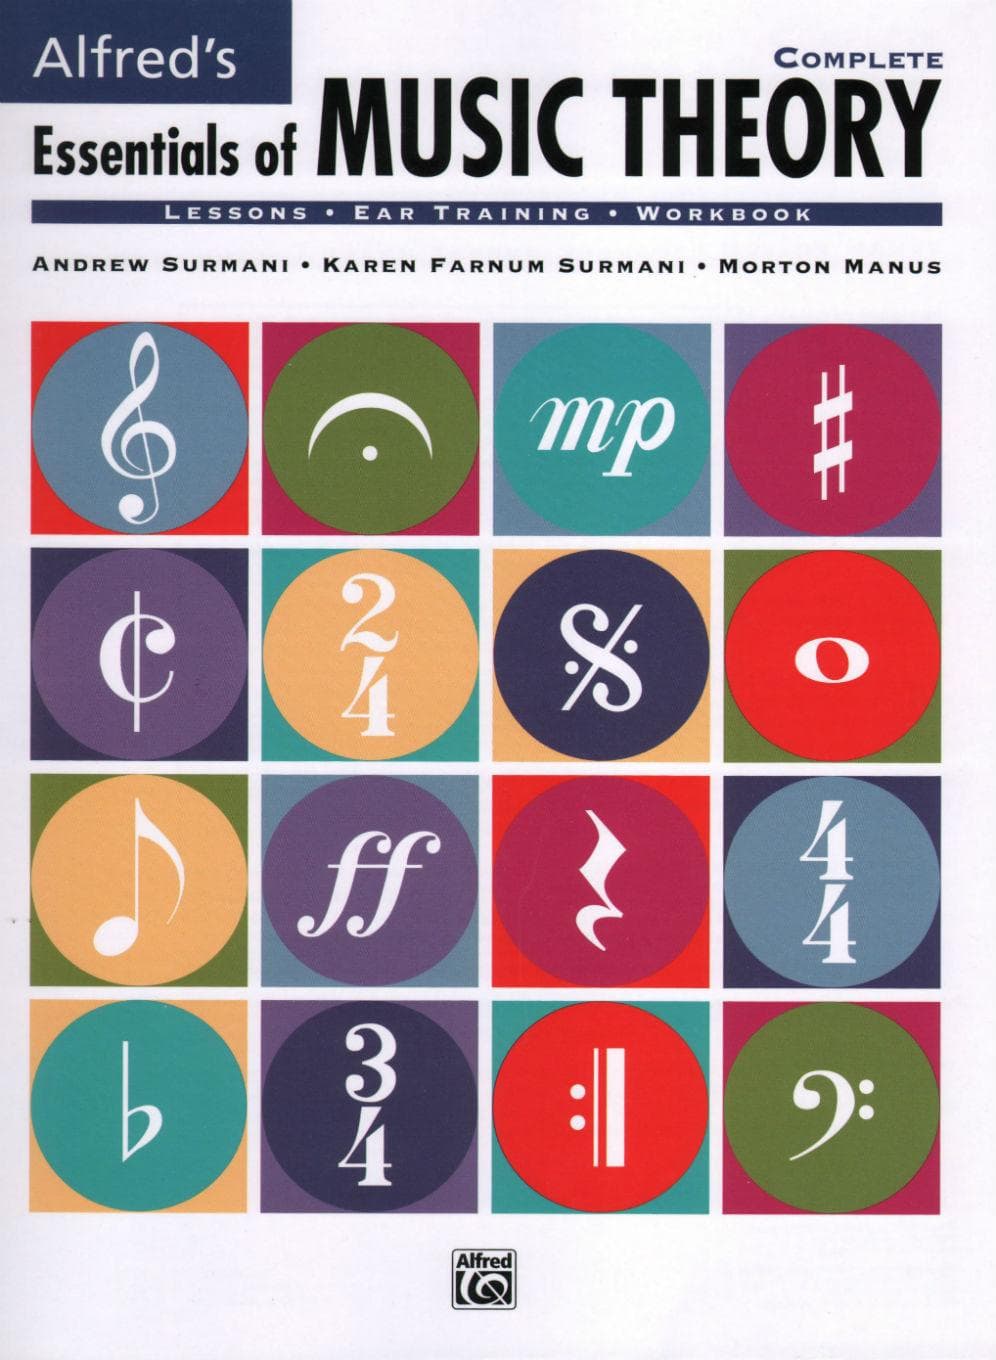 Alfred's Essentials of Music Theory (Complete) - by Andrew Surmani, Karen Farnum Surmani, and Morton Manus - Alfred Music Publishing